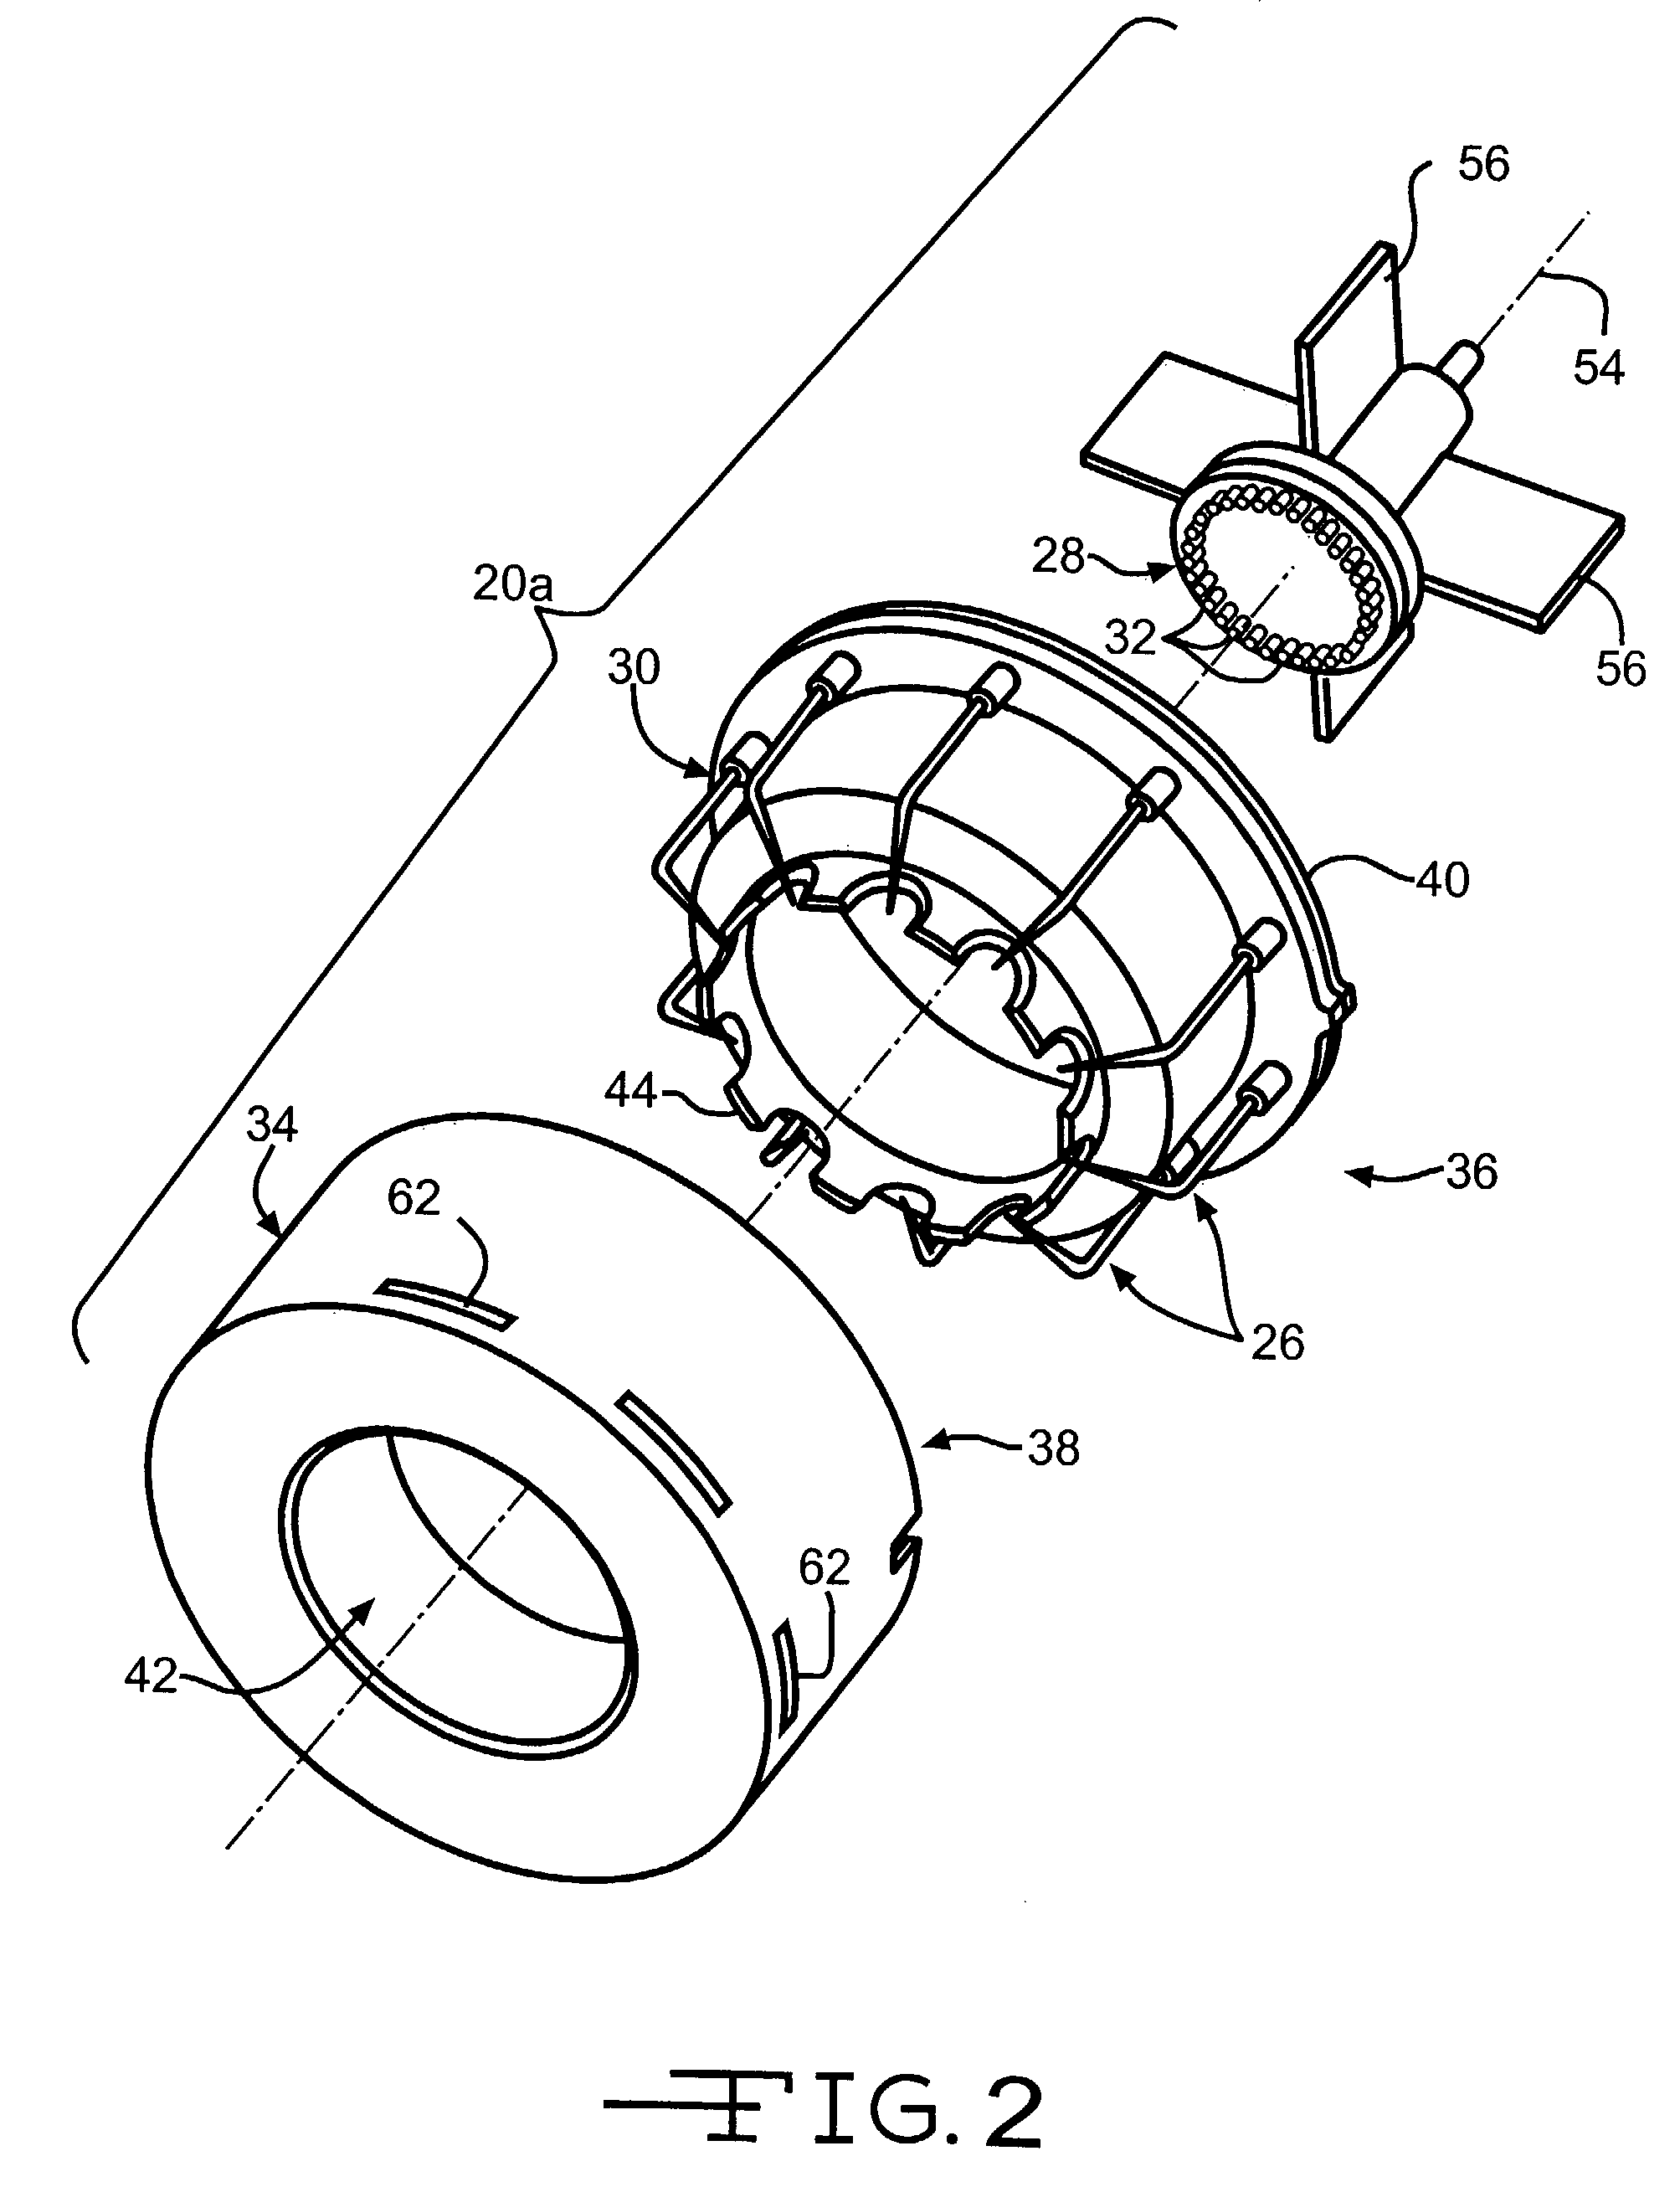 Nozzle for handheld pulmonary aerosol delivery device